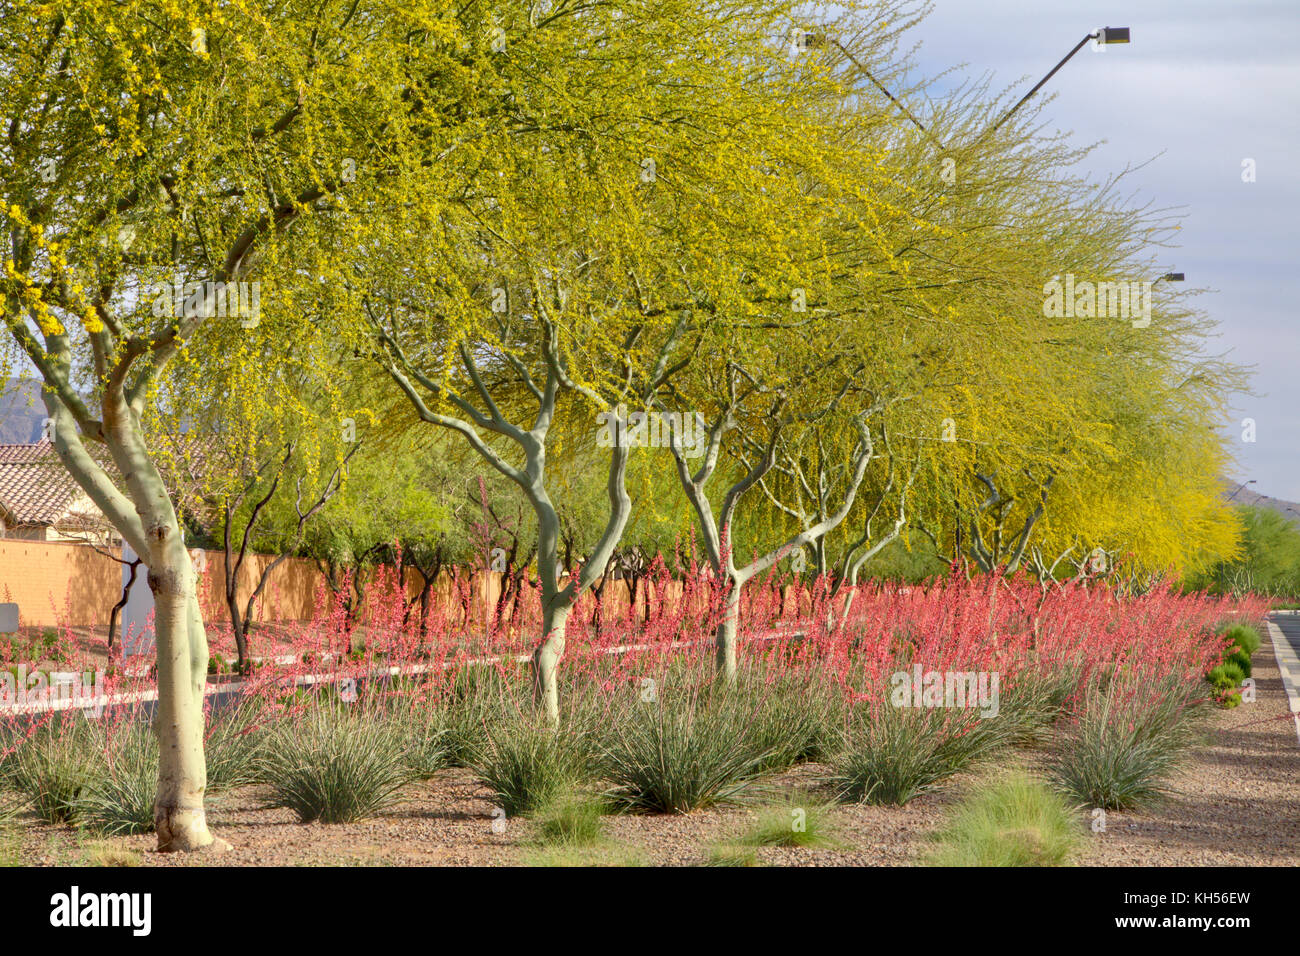 Palo Brea and Red yucca planted in a traffic island. Stock Photo